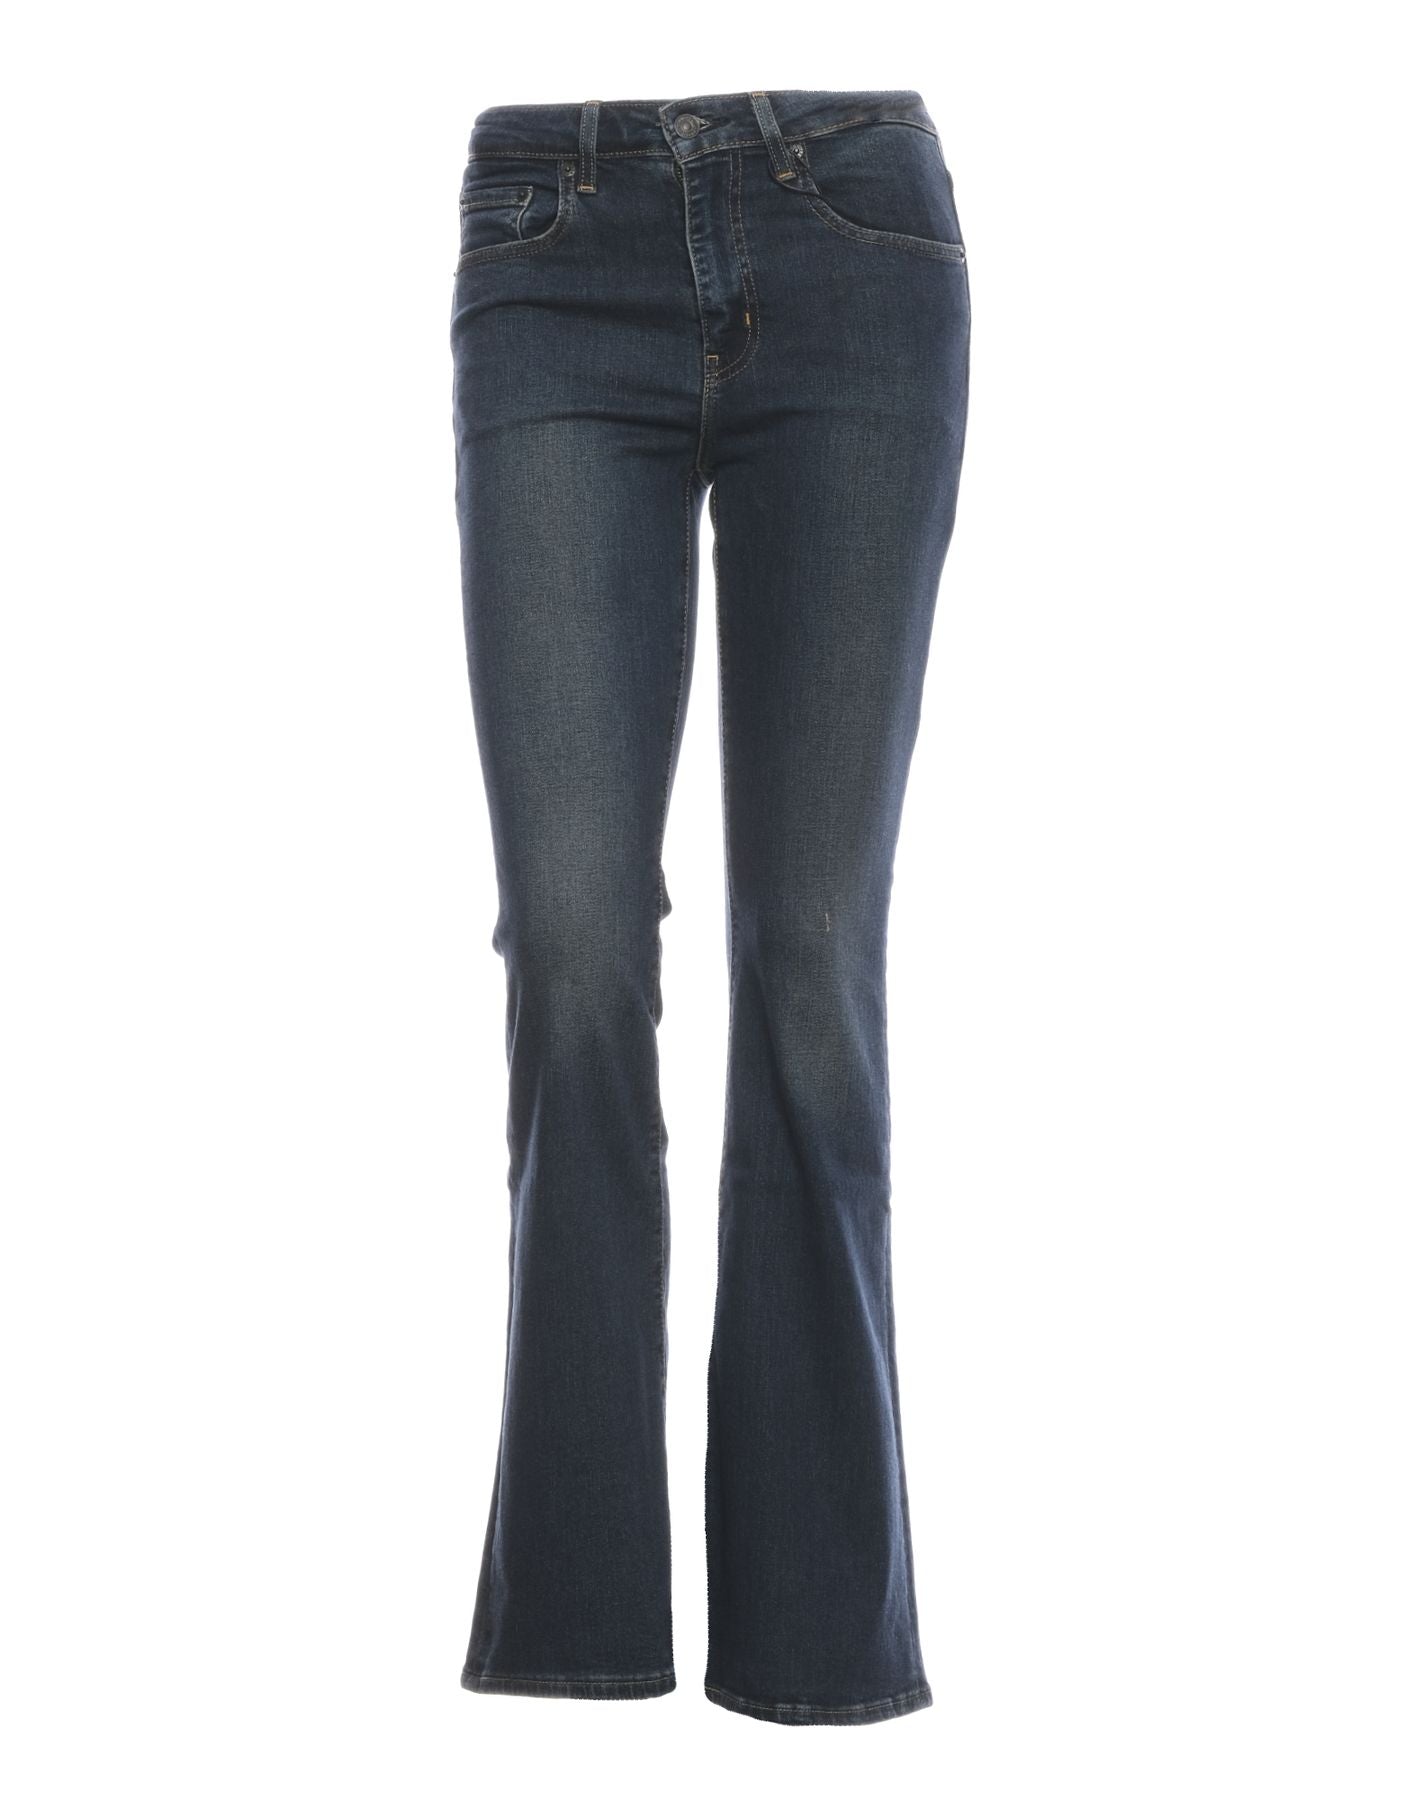 Jeans for woman A34100014 BLUE SWELL Levi's